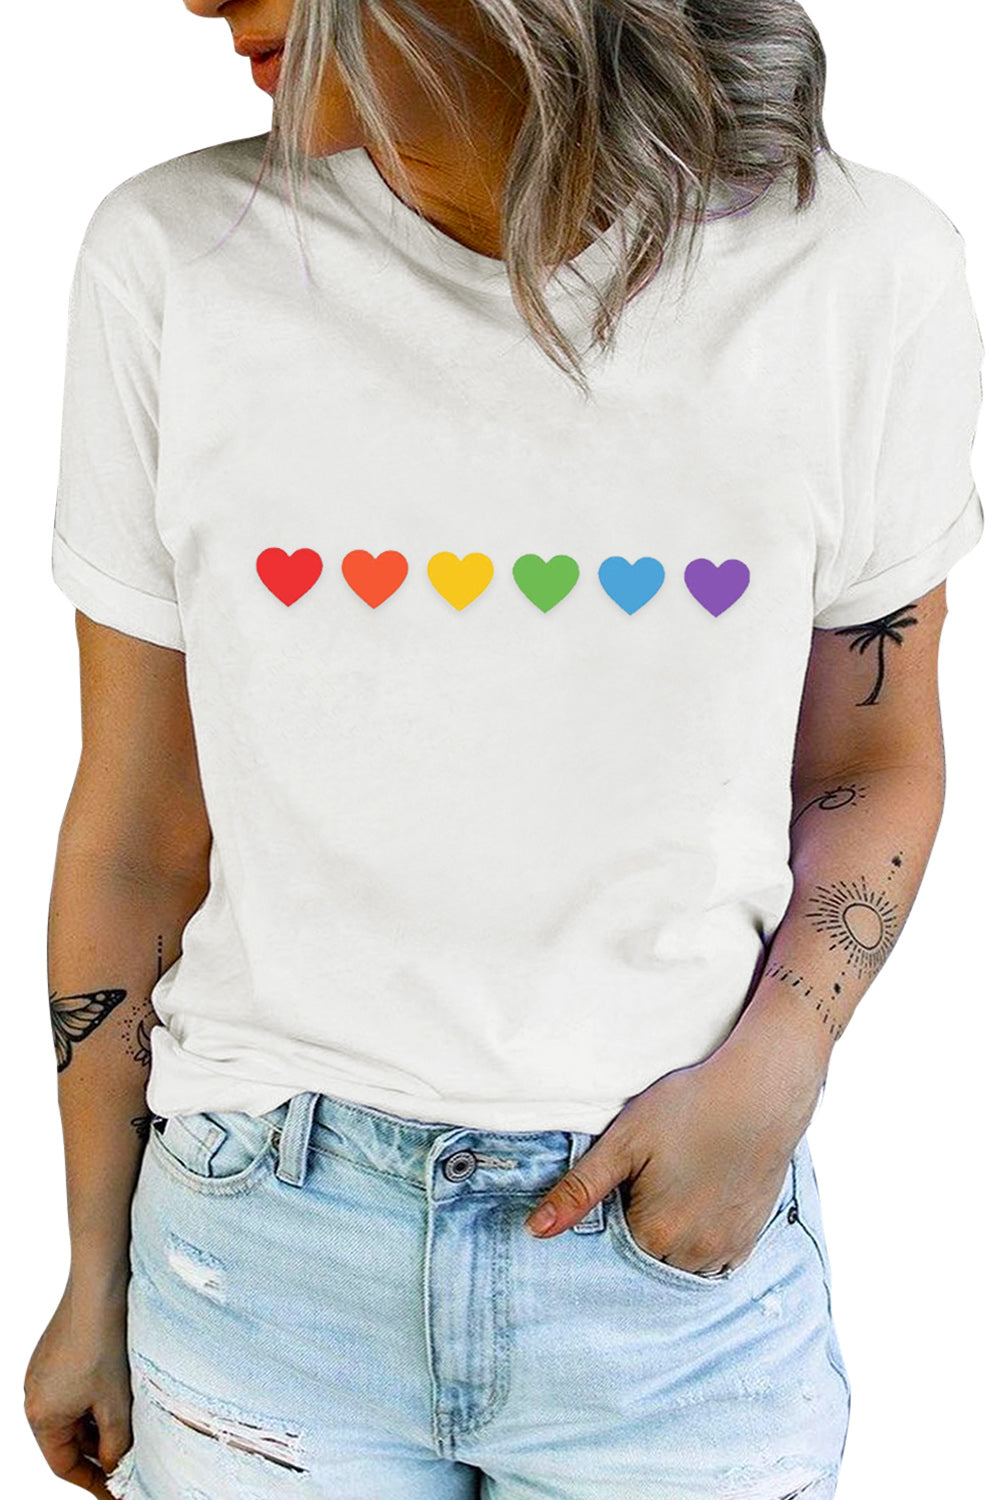 LC25216195-1-S, LC25216195-1-M, LC25216195-1-L, LC25216195-1-XL, LC25216195-1-2XL, White Women Pride Rainbow Color Heart Shapes Graphic Tee Summer Shirts Tops